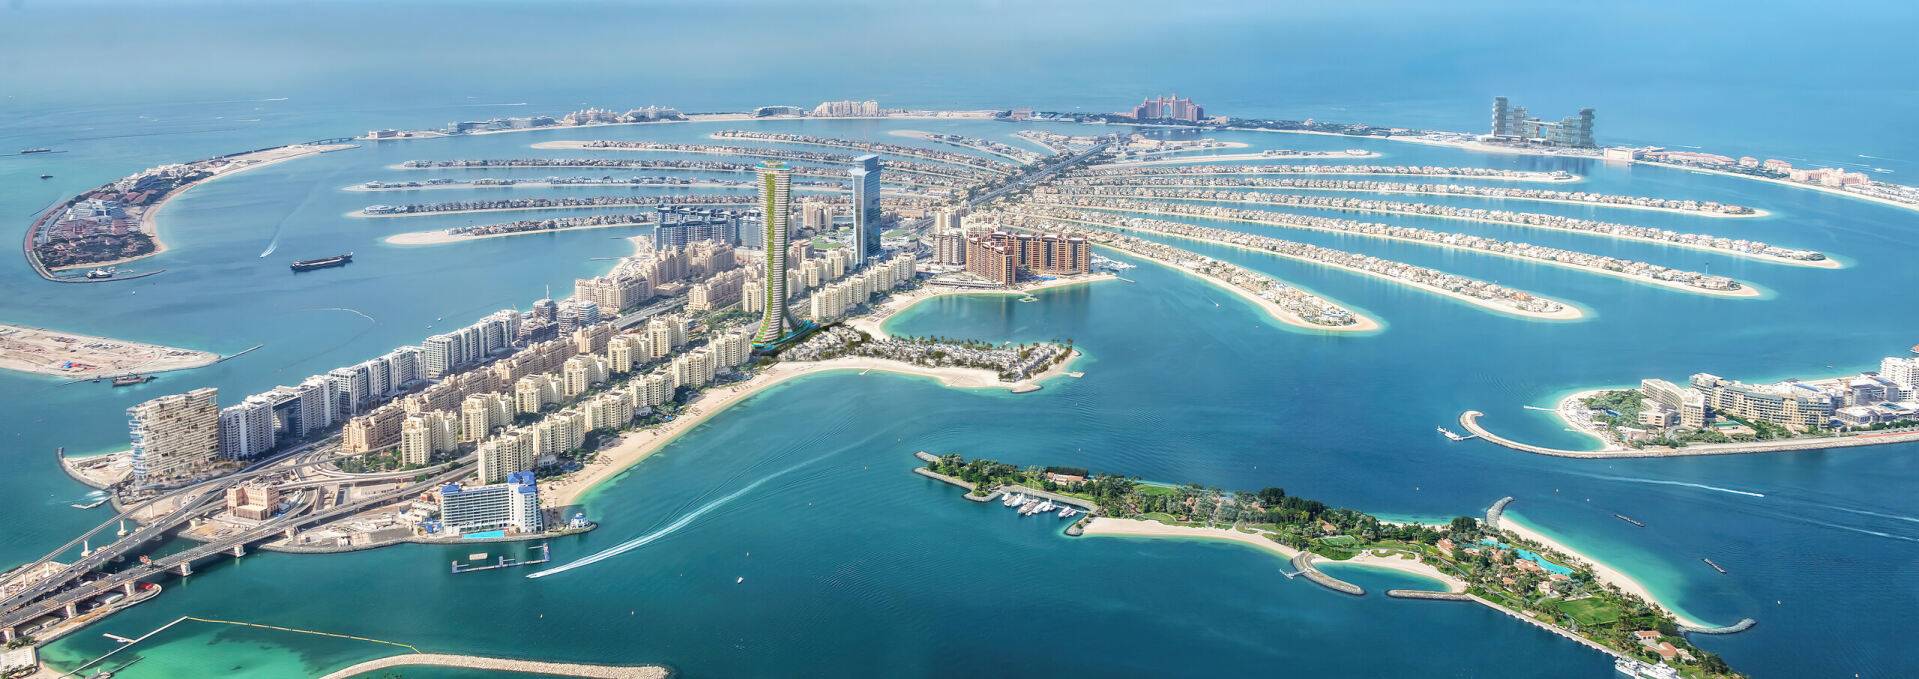 Ultra-Luxurious 3BR Apartment in Como Residences, Palm Jumeirah: Exclusive Waterfront Living with World-Class Amenities and Stunning Panoramic Views